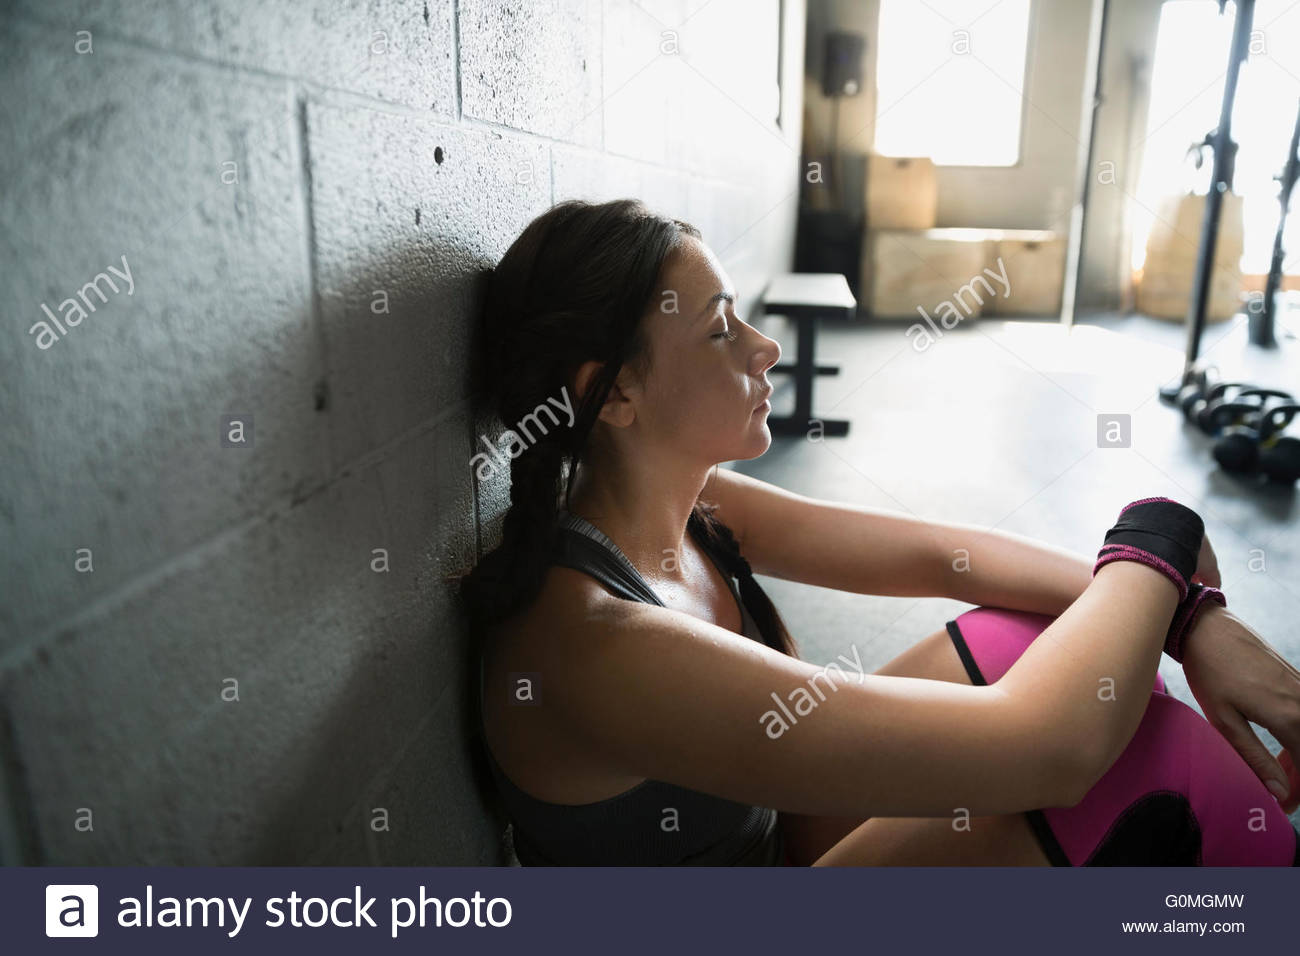 Tired woman resting at gym Banque D'Images